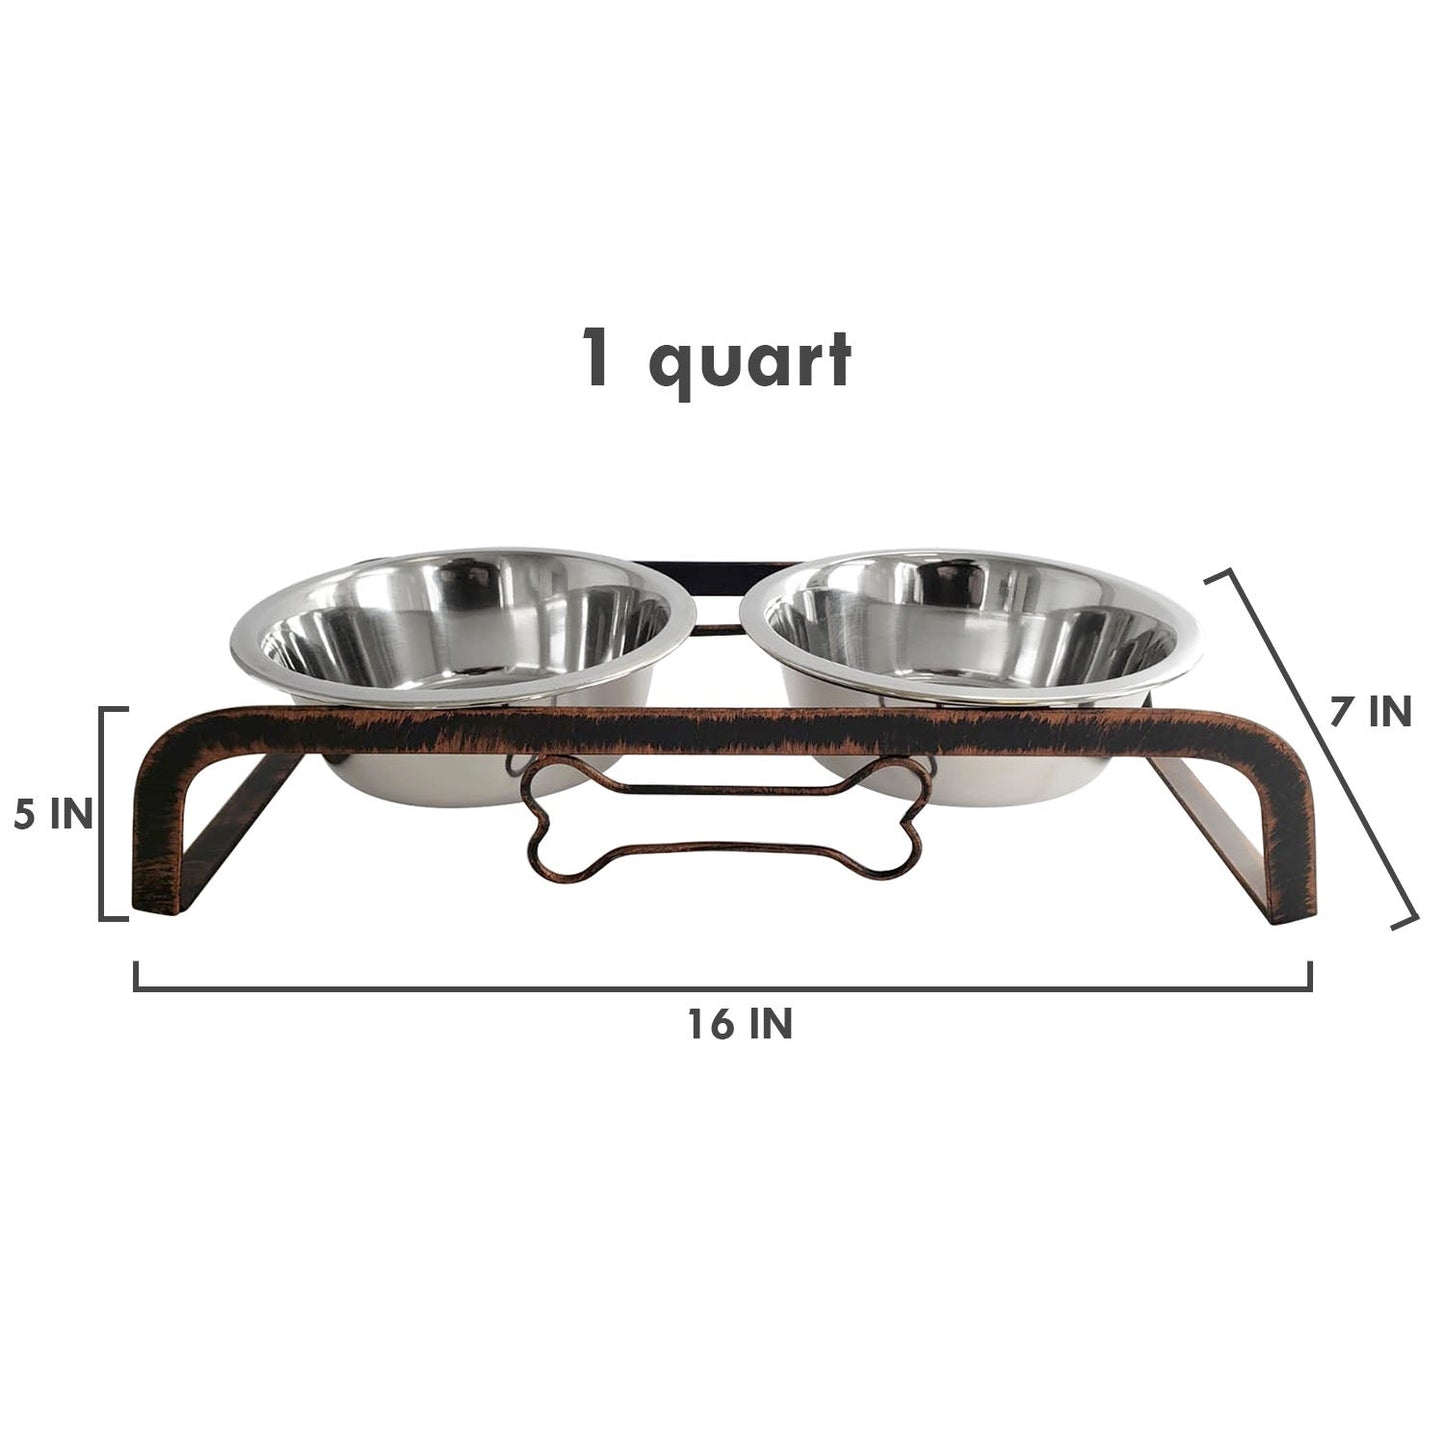 Country Living Elevated Rustic Design Dog Bone Feeder with 2 Stainless Steel Bowls